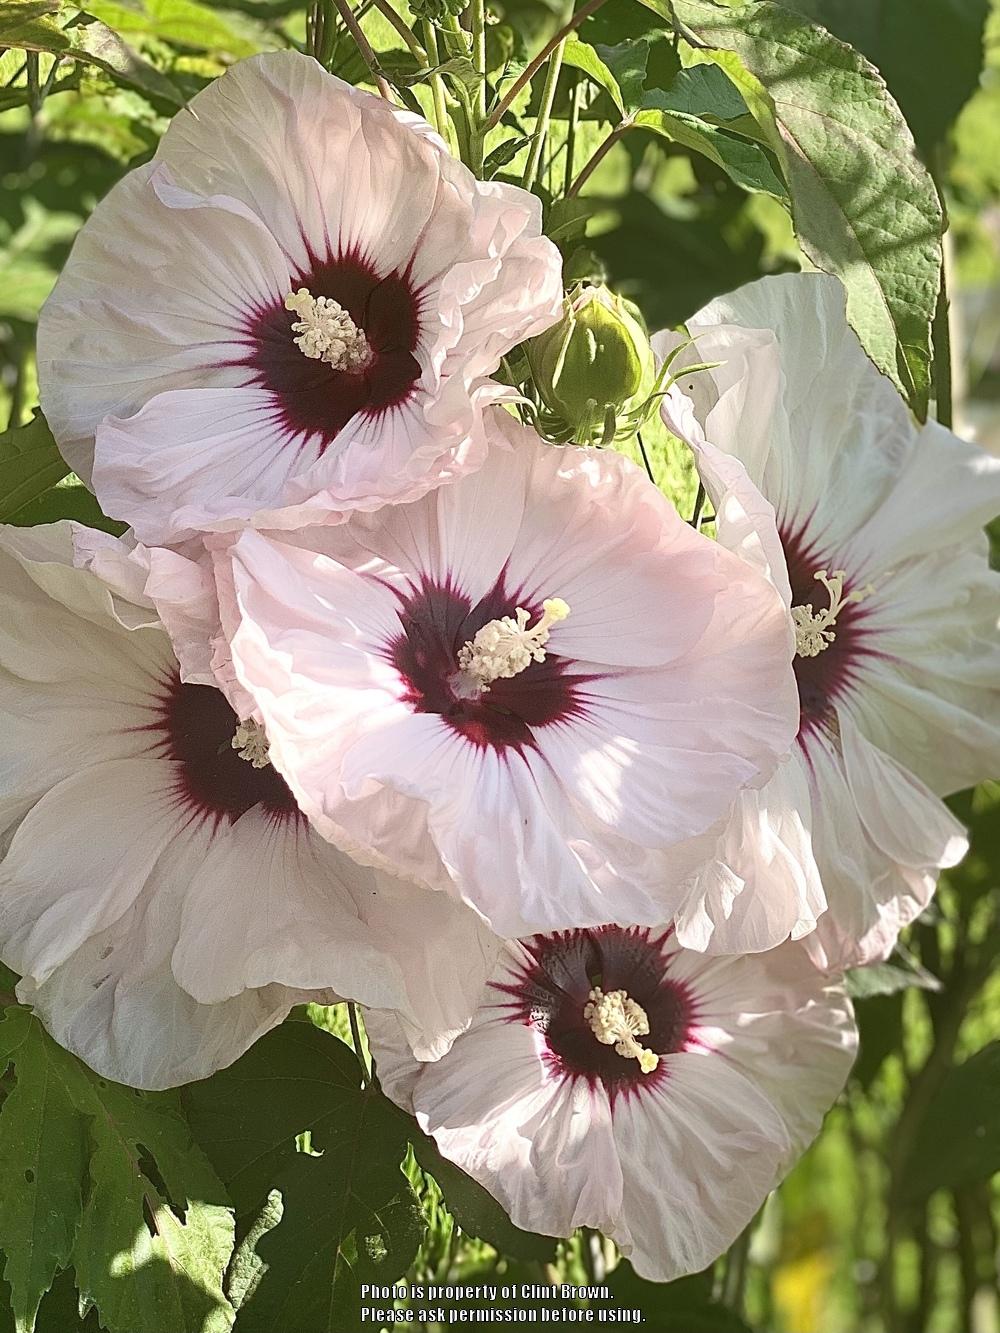 Photo of Hybrid Hardy Hibiscus (Hibiscus Summerific™ Cherry Cheesecake) uploaded by clintbrown